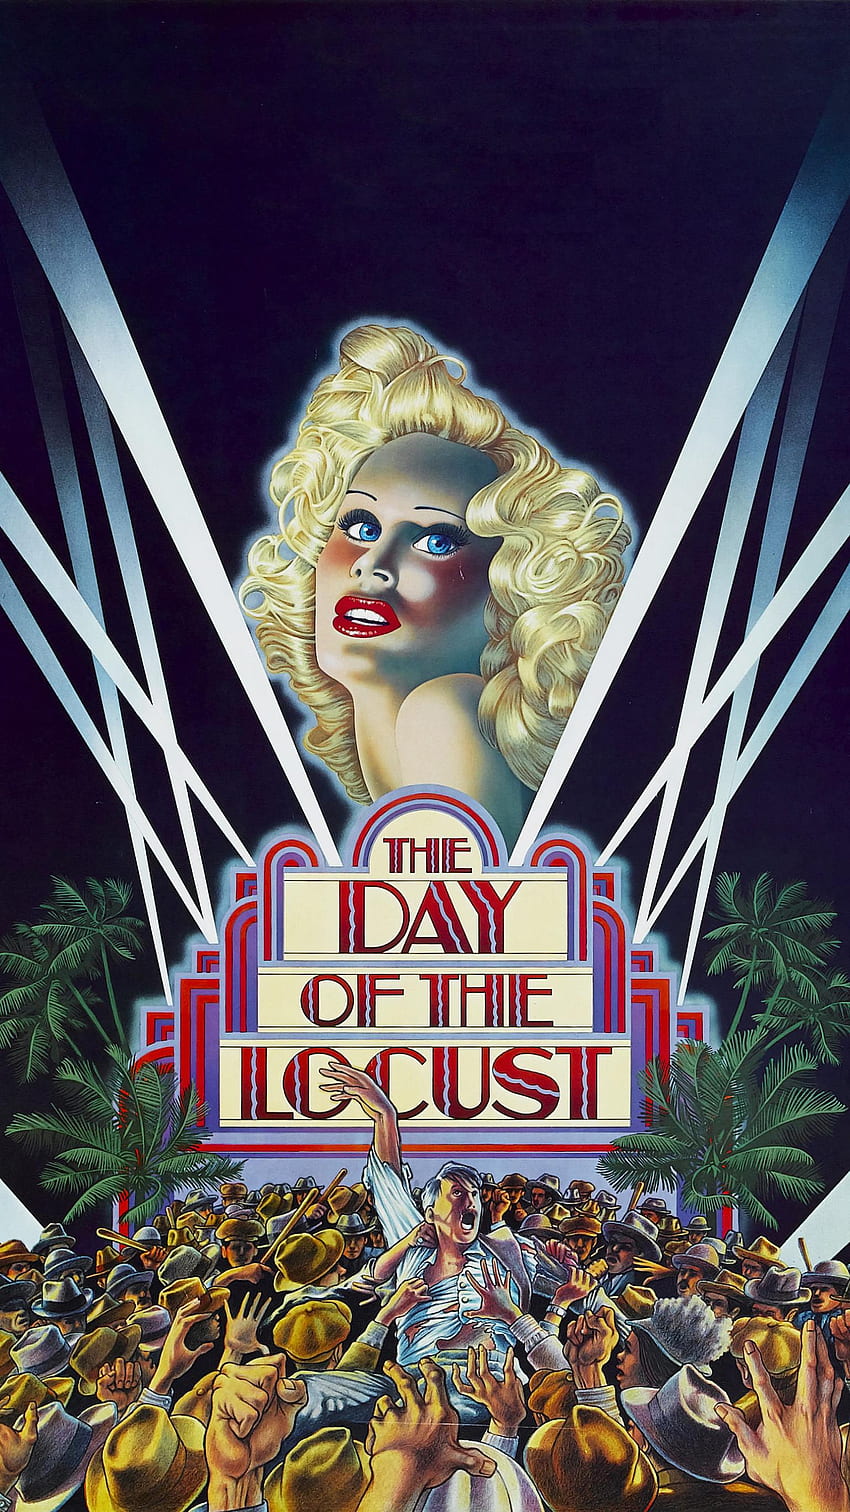 The Day of the Locust (2022) movie HD phone wallpaper